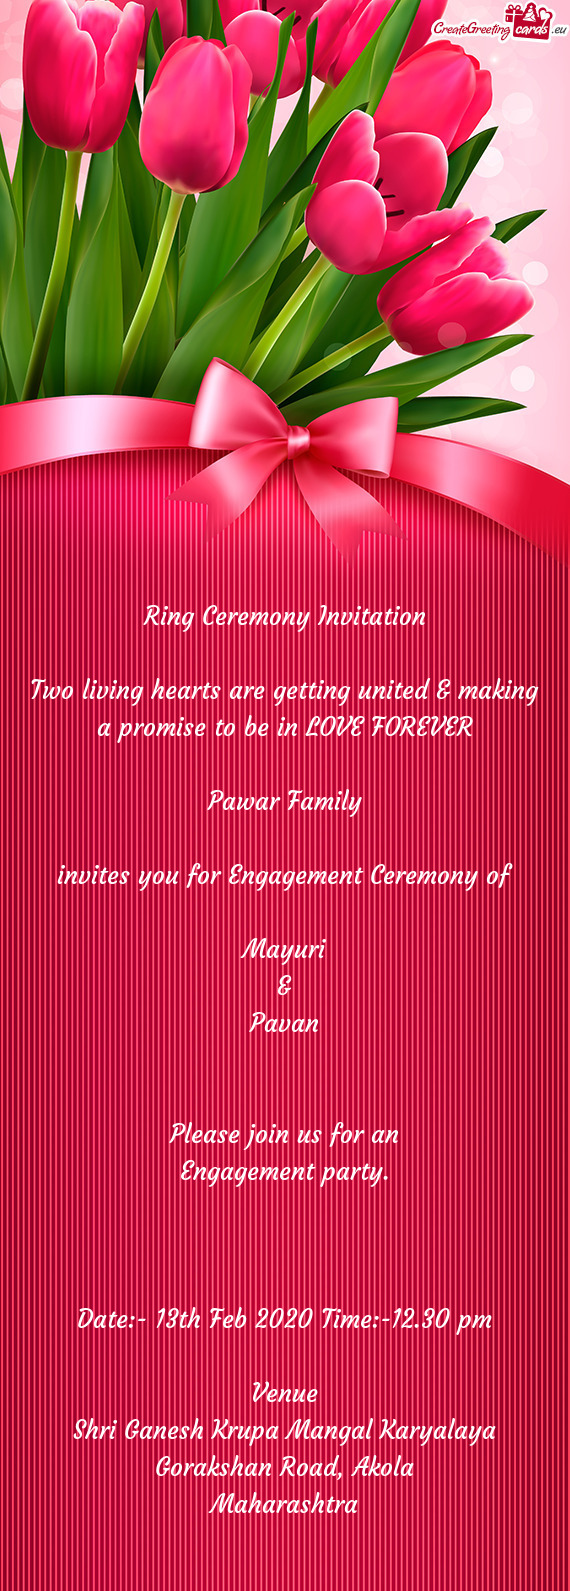 REVER
 
 Pawar Family
 
 invites you for Engagement Ceremony of
 
 Mayuri
 &
 Pavan
 
 
 Please join